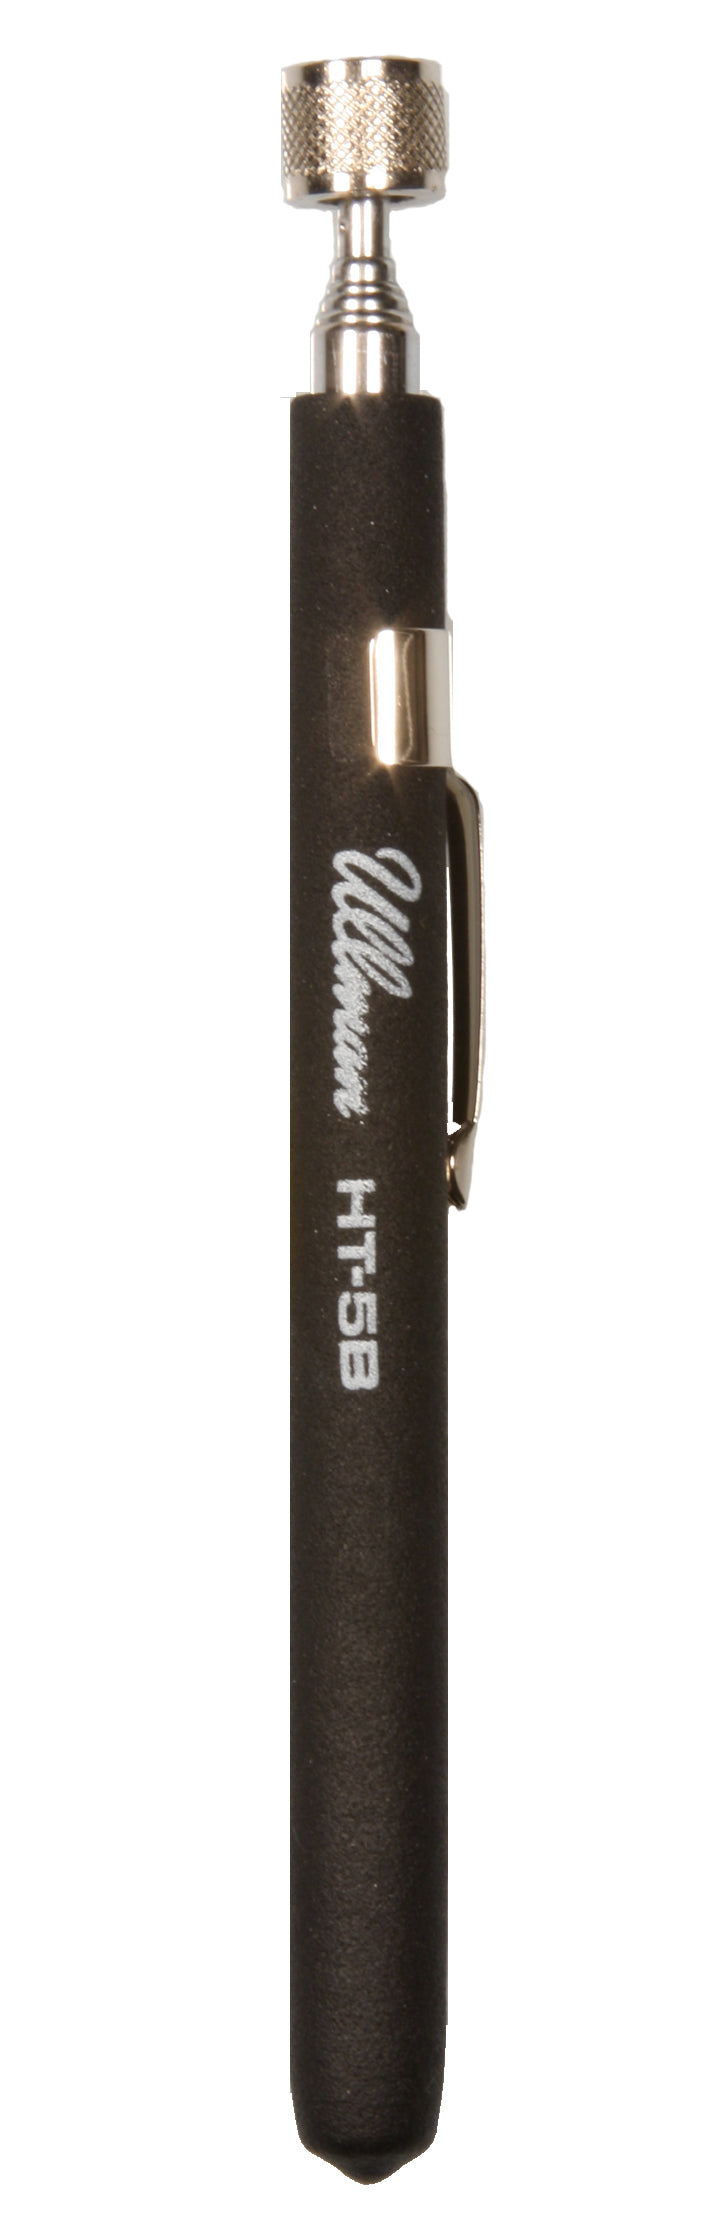 ULLMAN HT-5 Black Telescopic Magnetic Pick-Up Tool with POWERCAP®, HT5